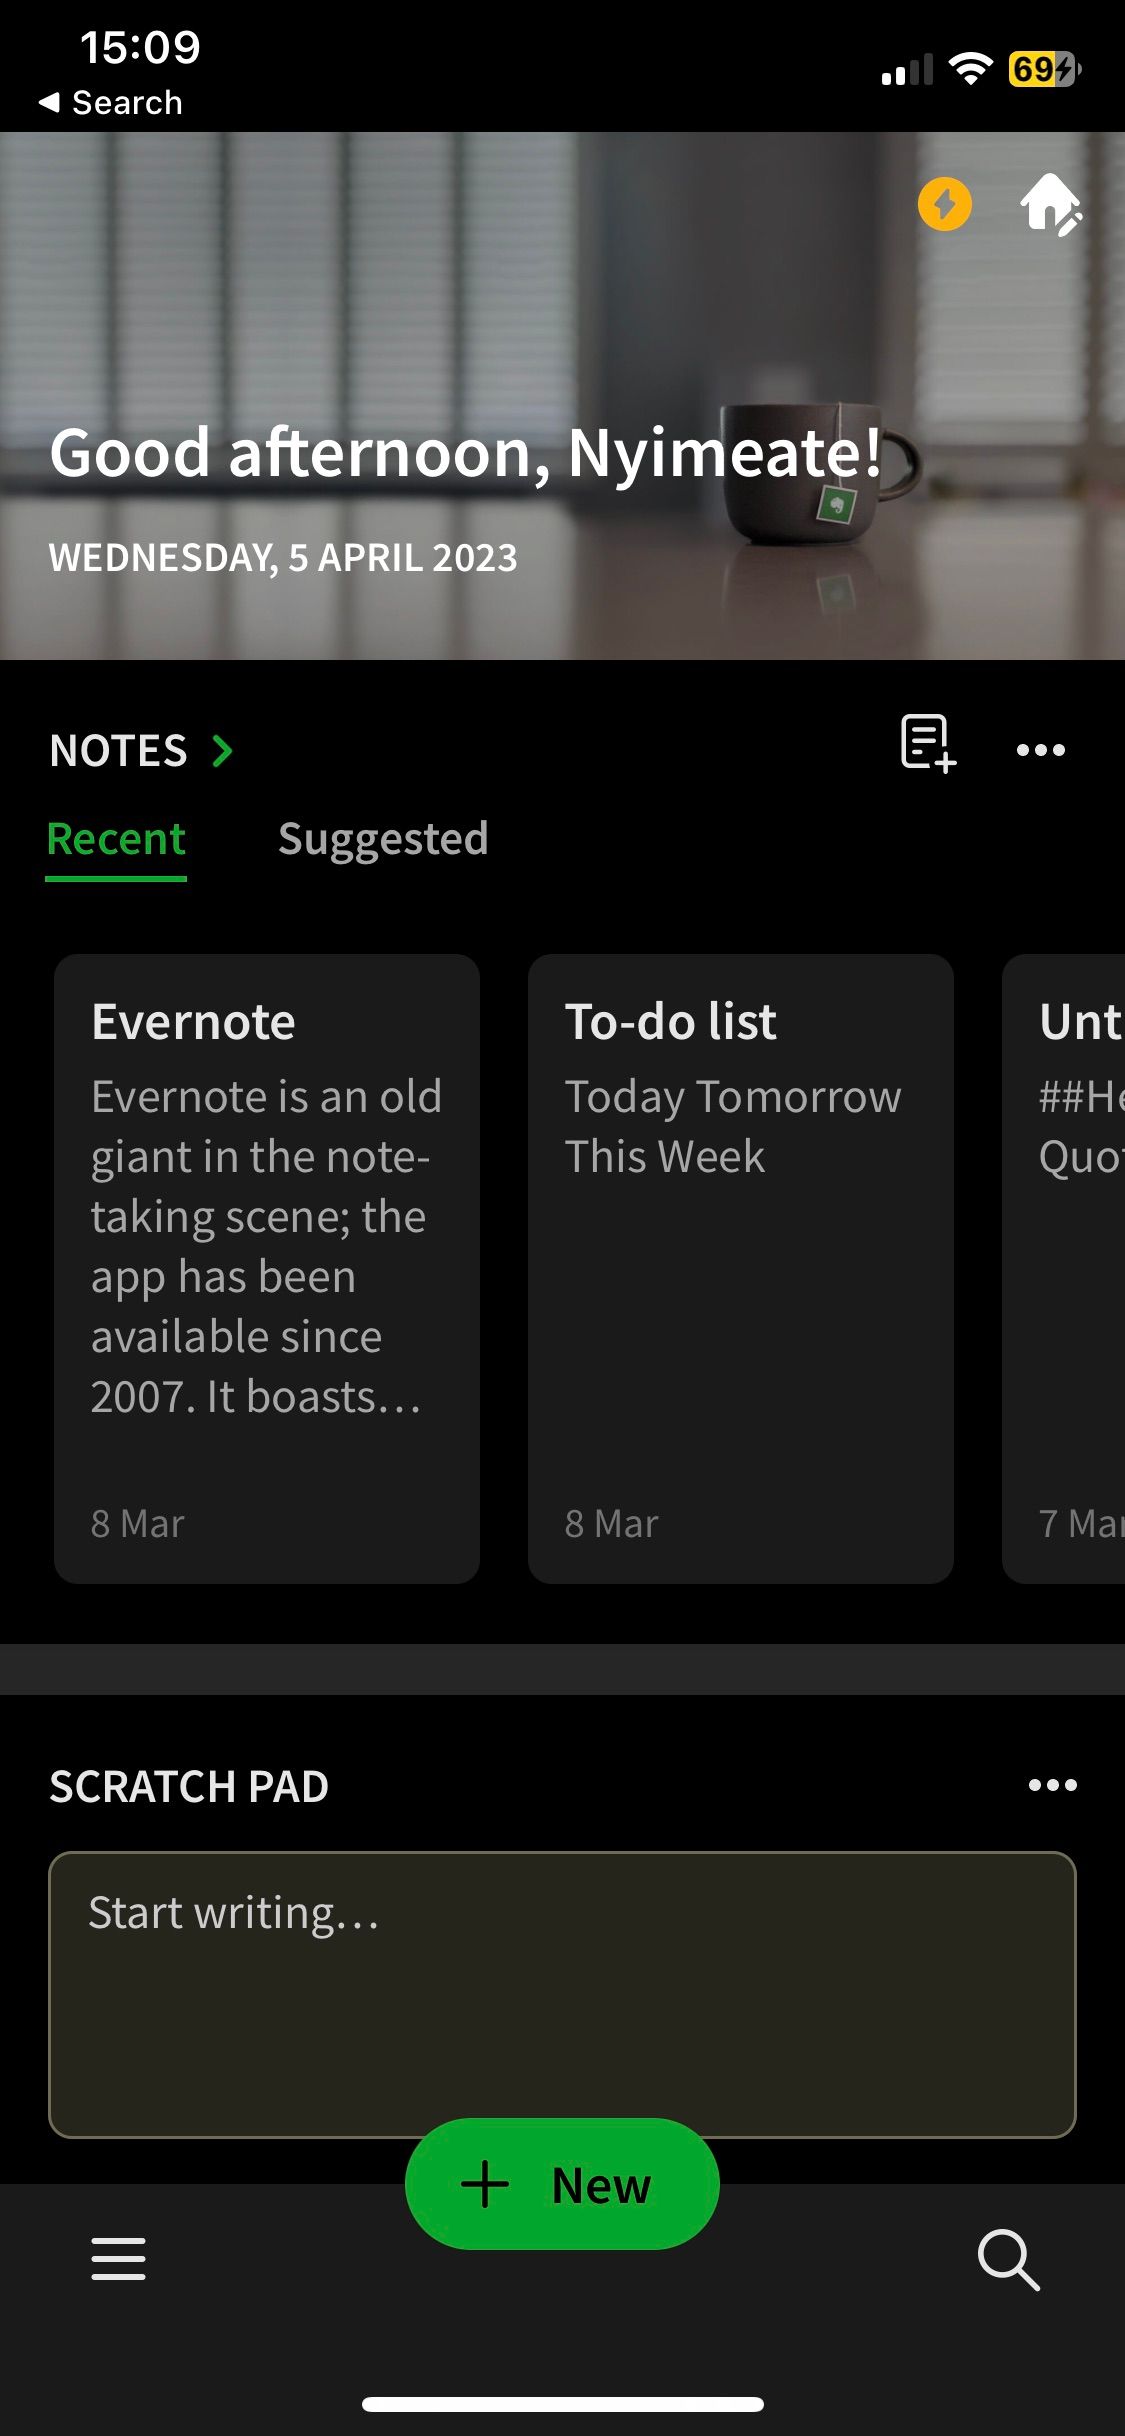 Evernote home screen displaying recent notes